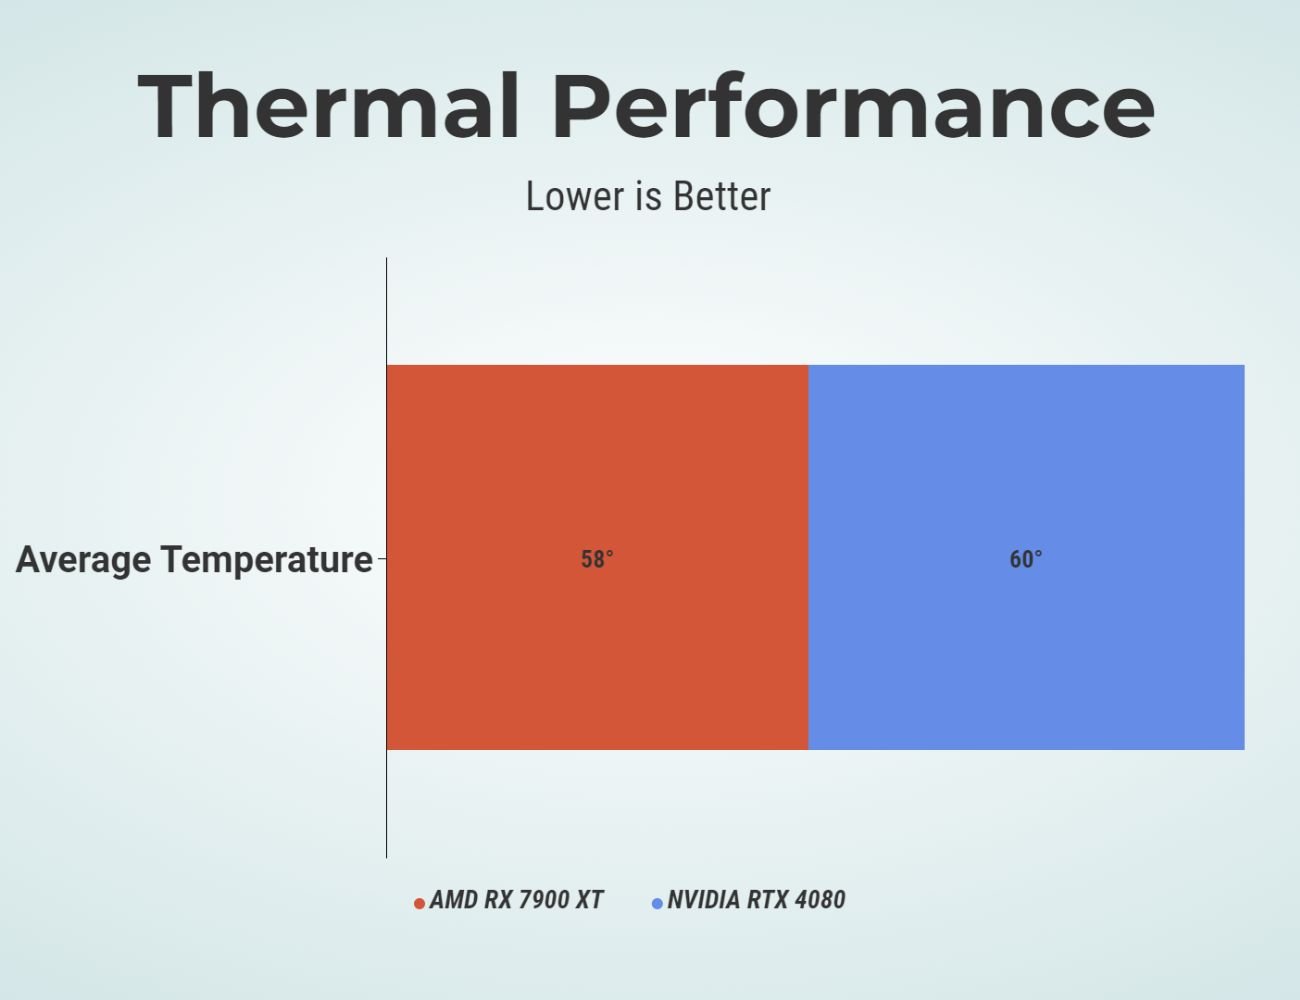 Thermal performance lower is better